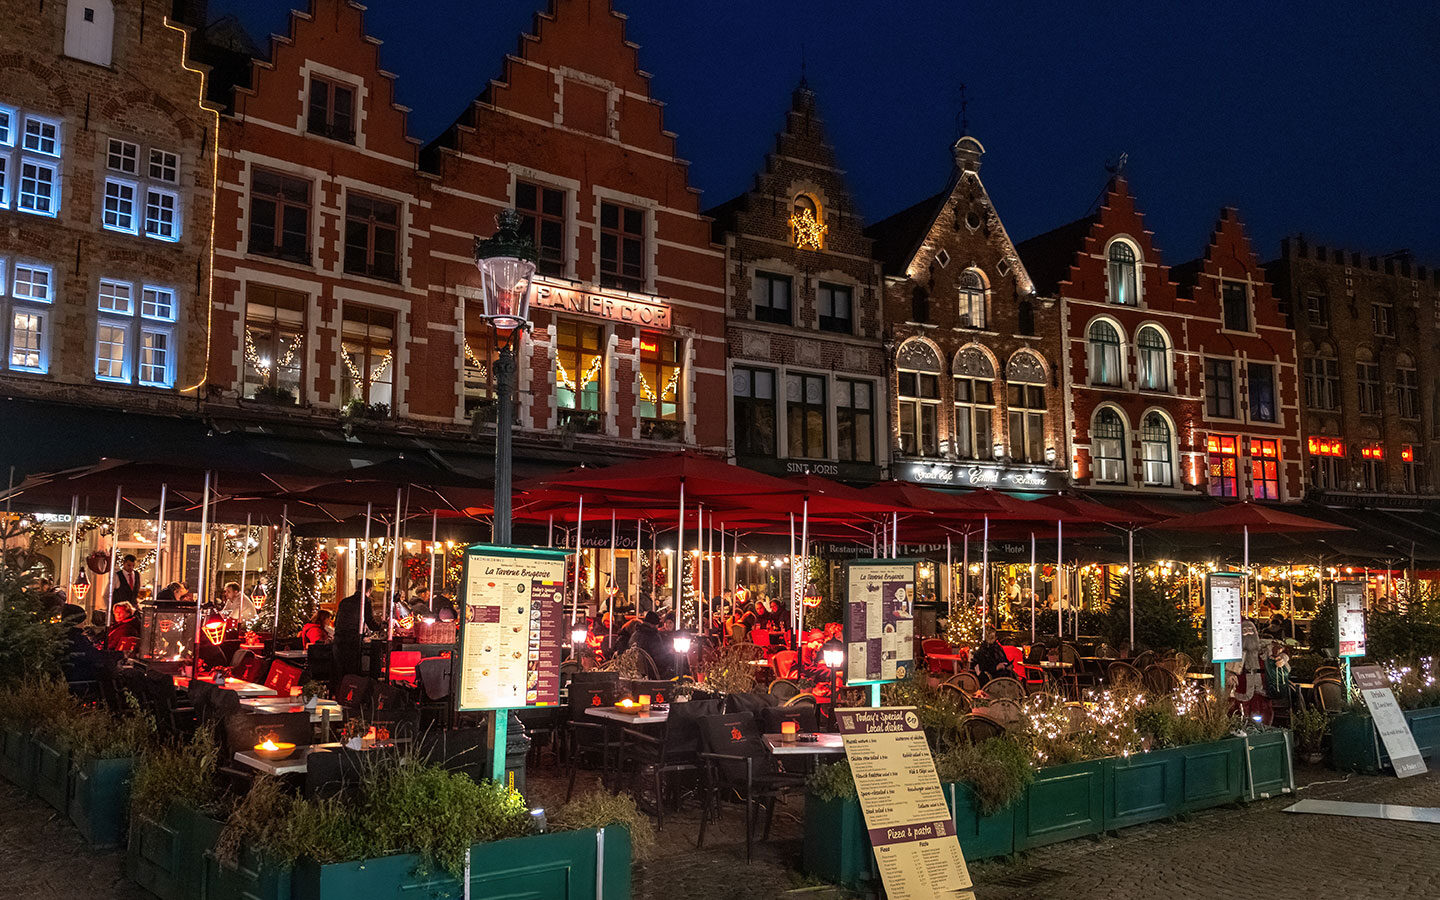 The Grote Markt in Bruges by night